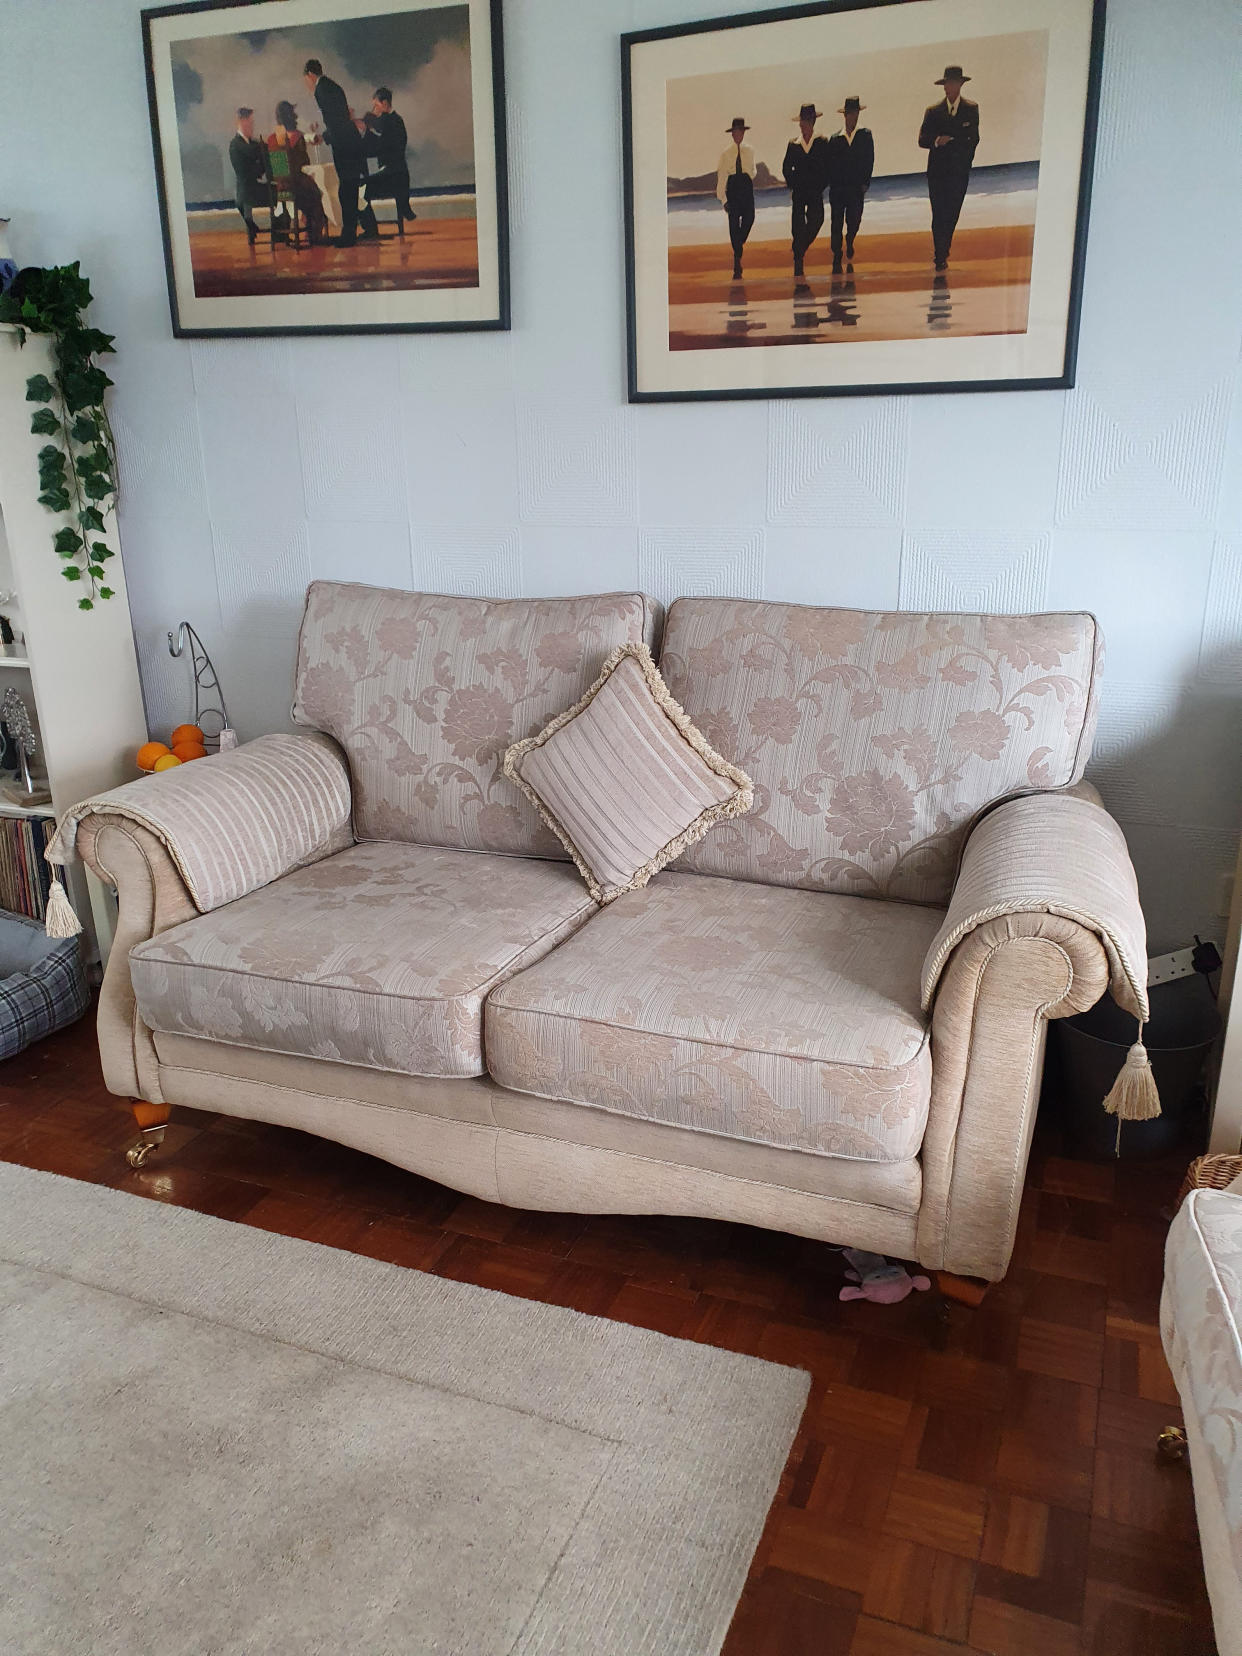 The sofa where Shirley McNally found a Machete hidden at her home in  Harlow, Essex. 